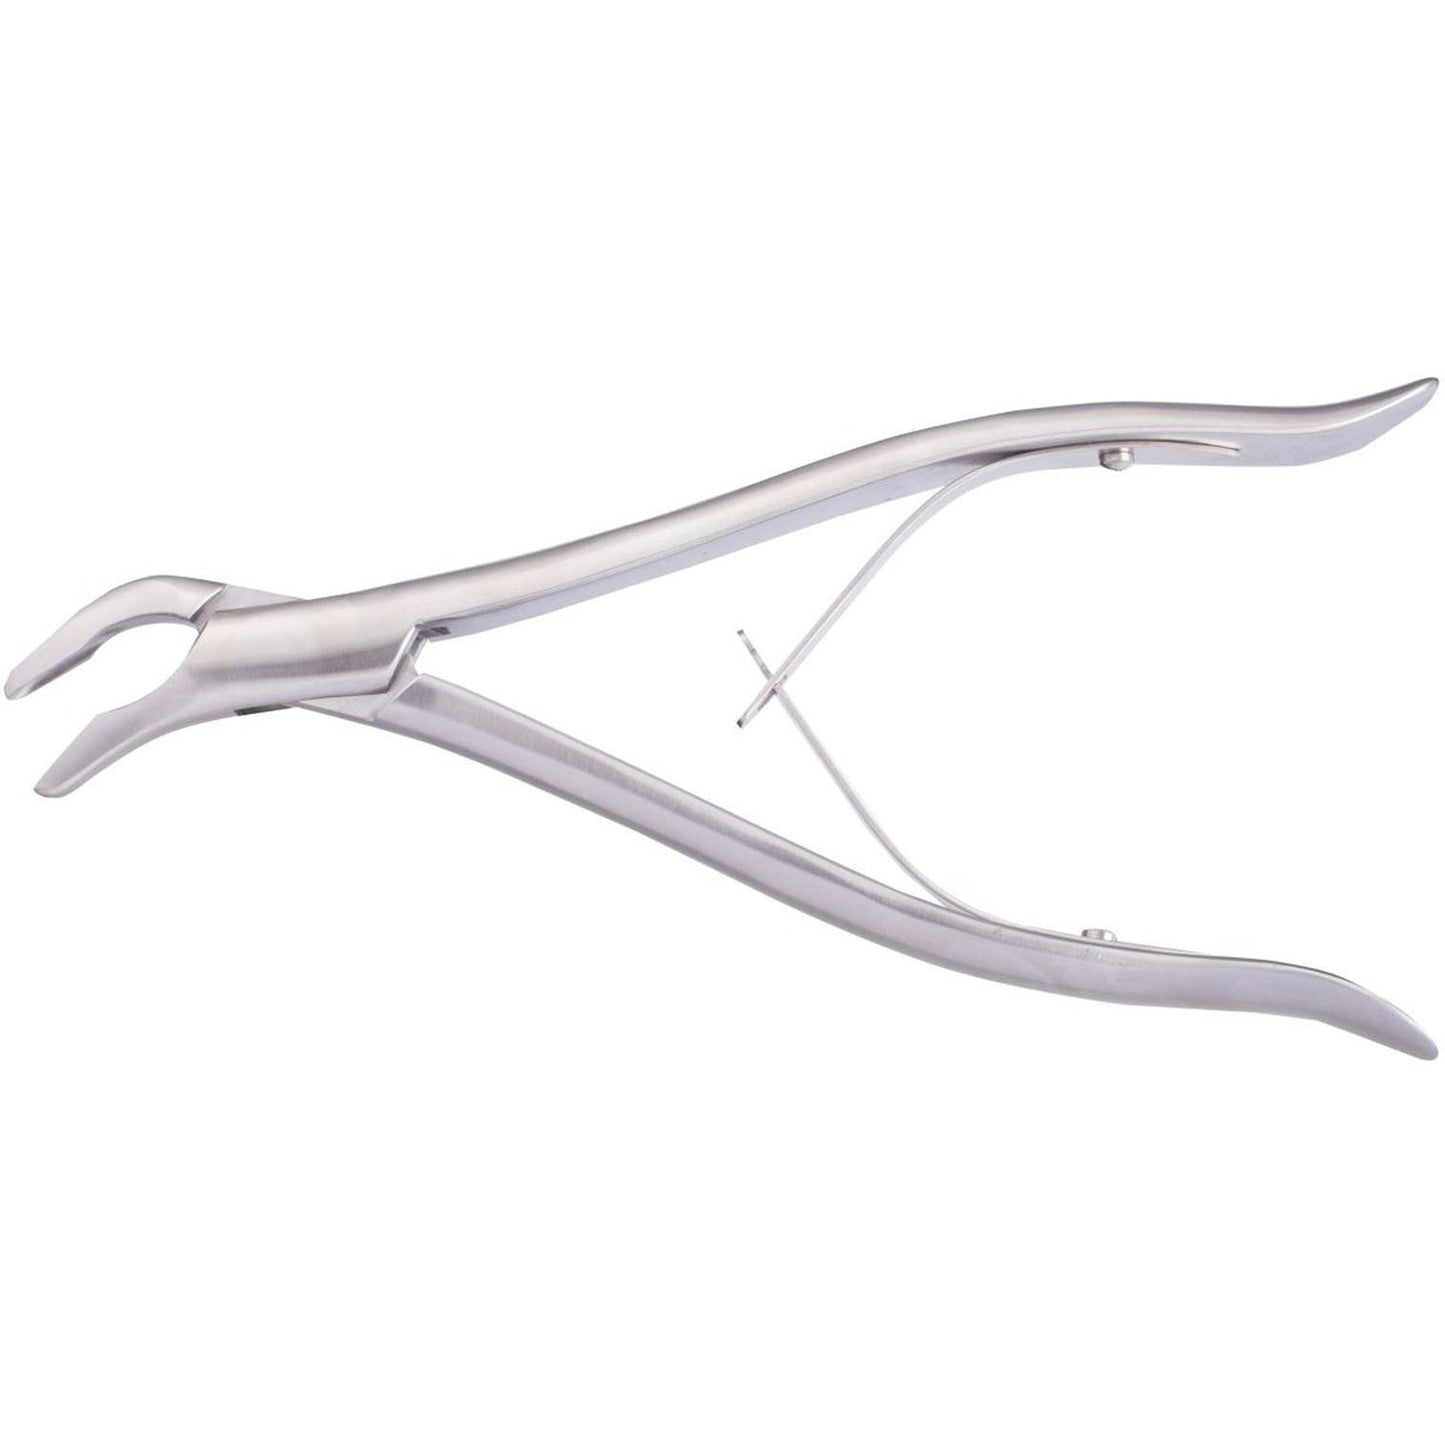 Adson Cranial Rongeur Forceps